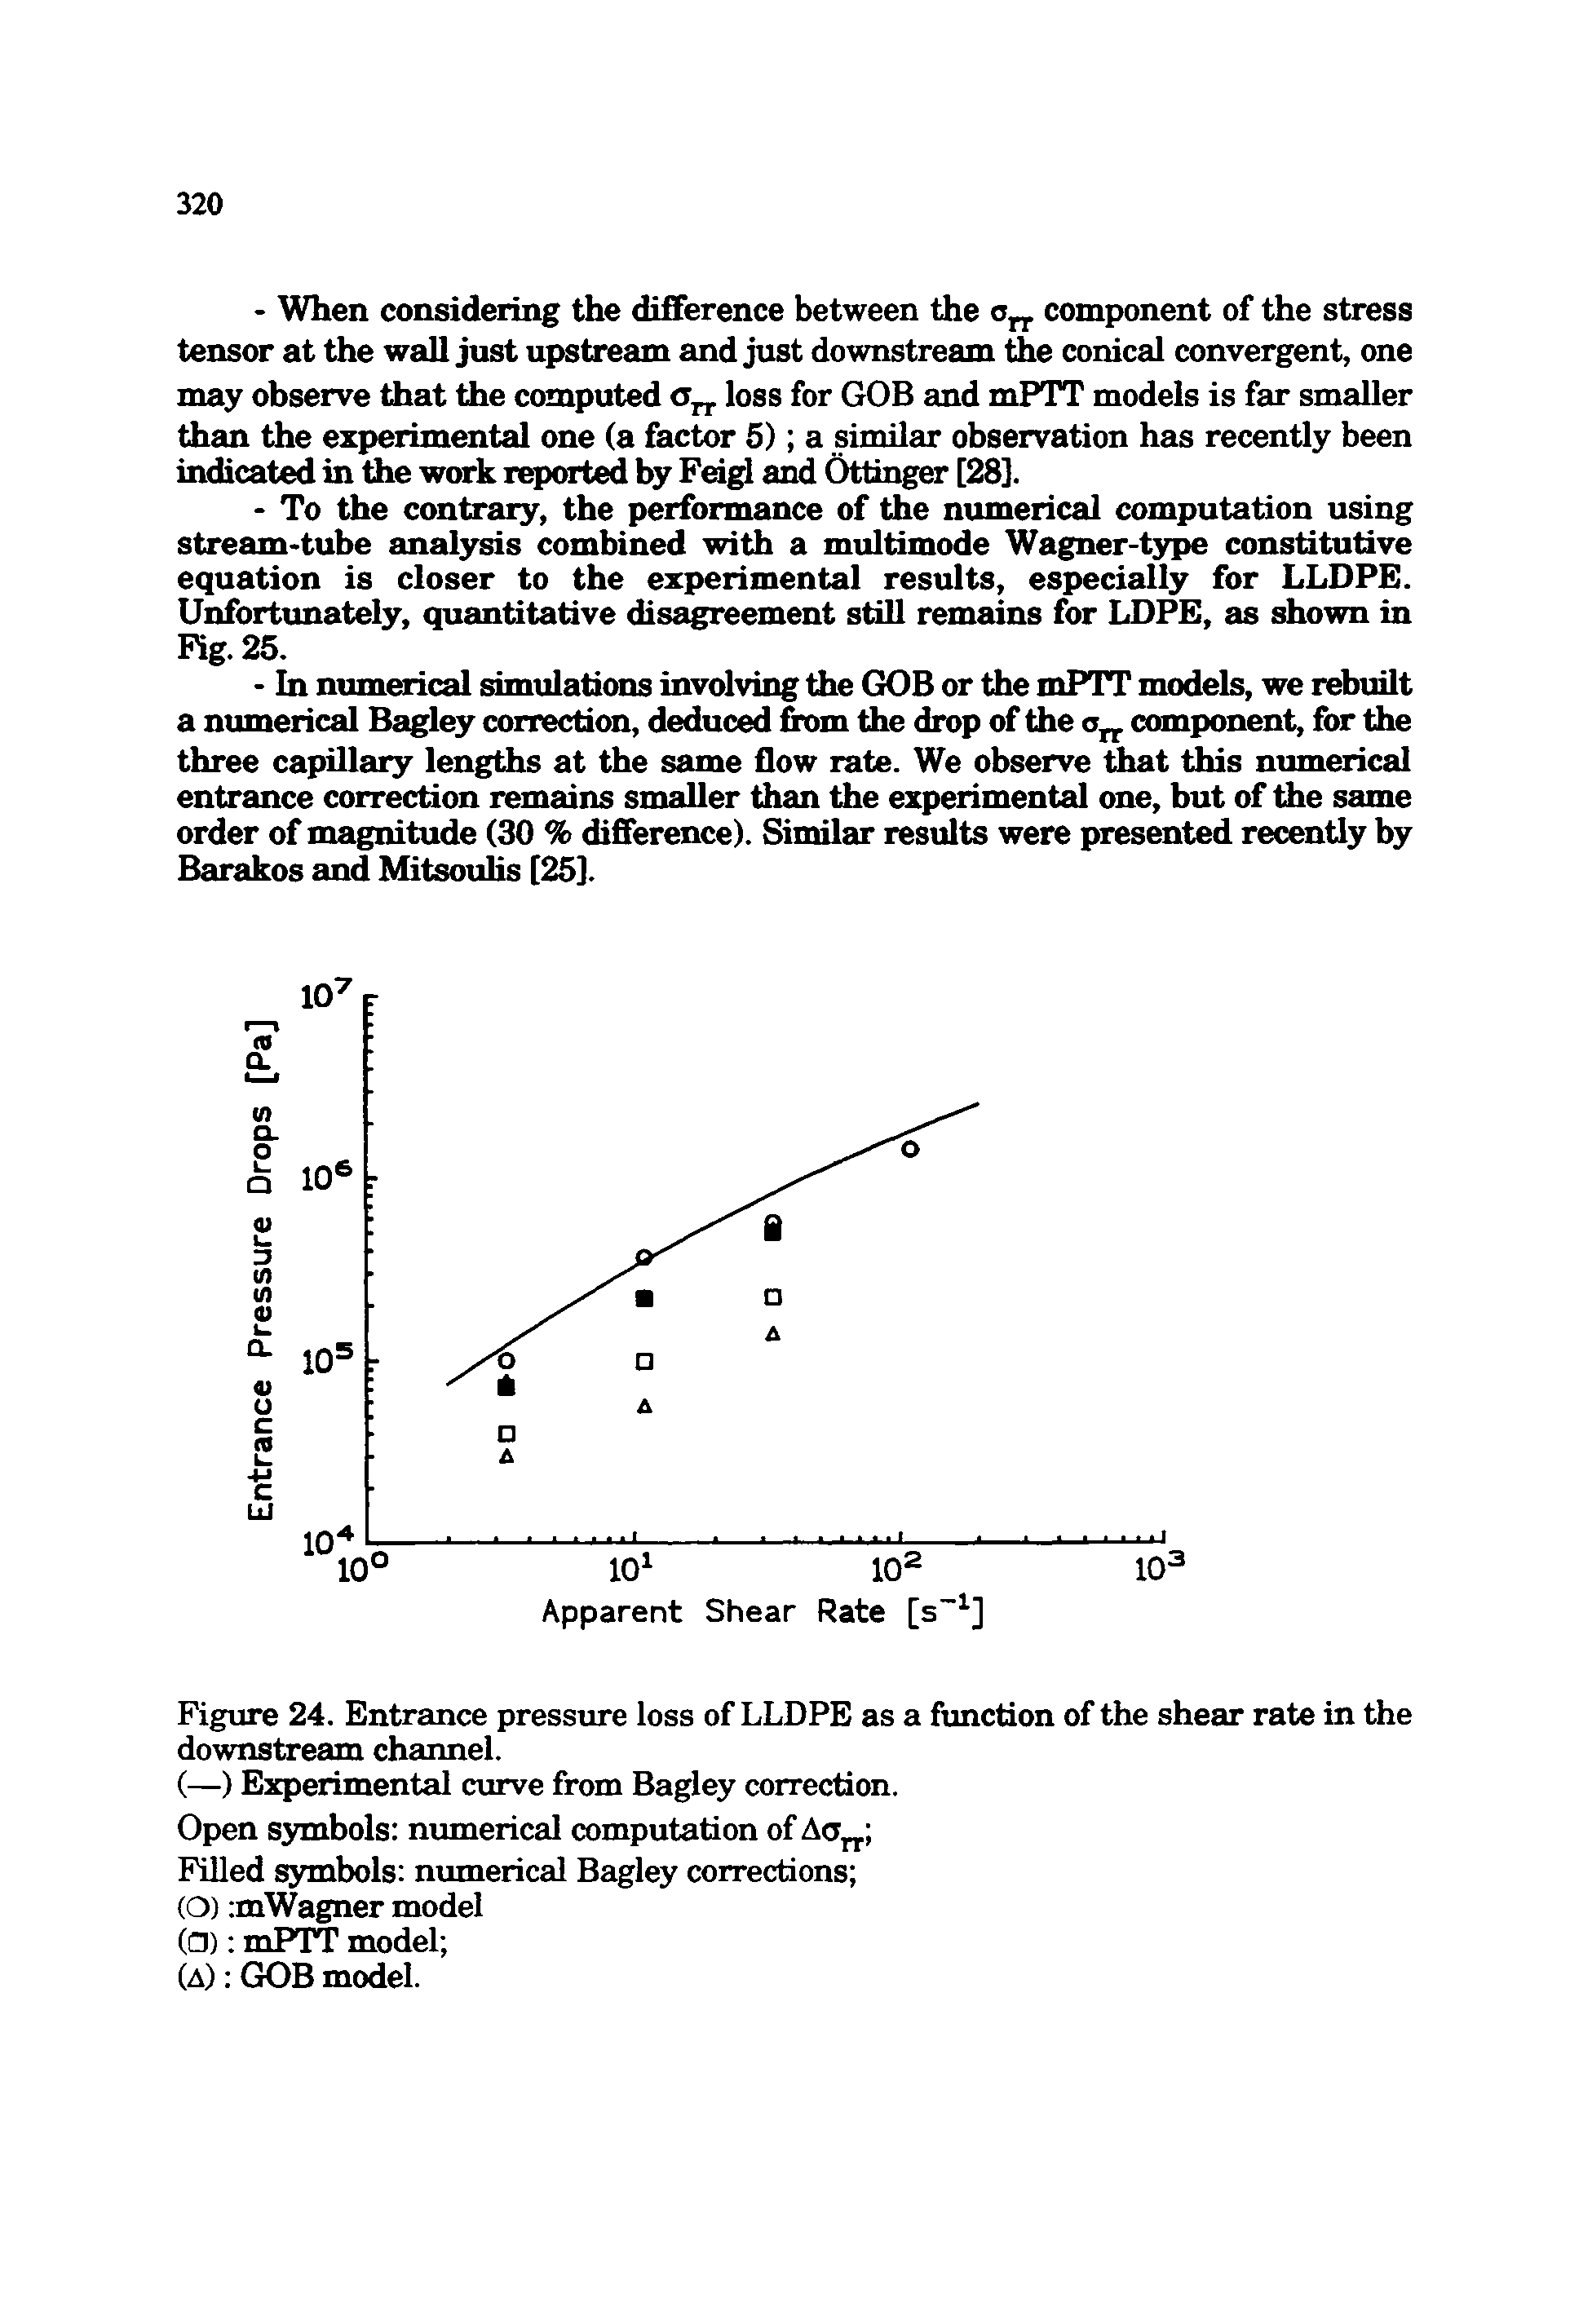 Figure 24. Entrance pressure loss of LLDPE as a function of the shear rate in the downstream channel.